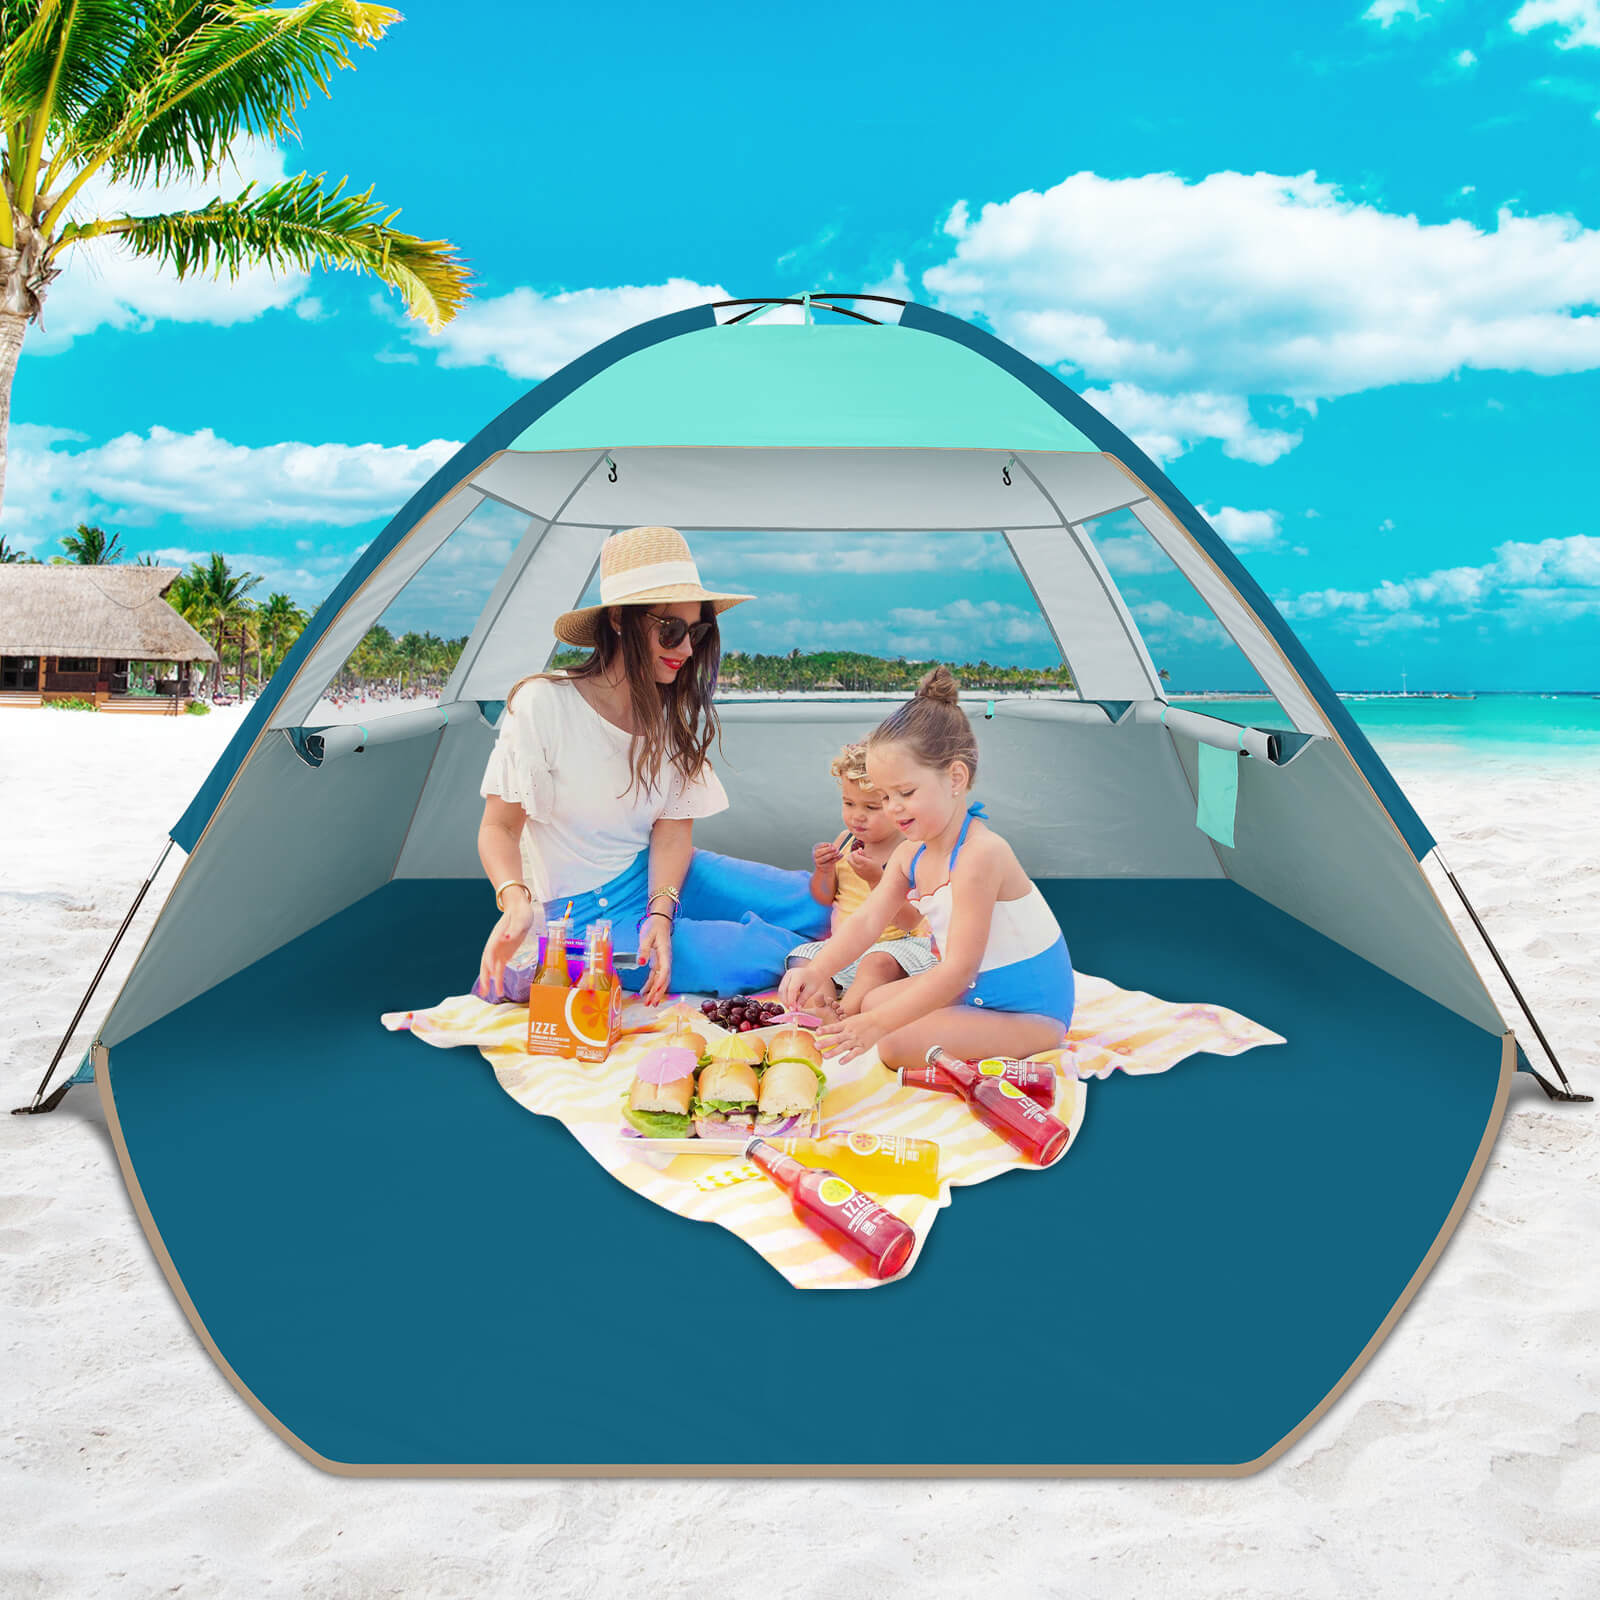 Commouds Portable UPF 50+ Beach Tent [Turquoise]